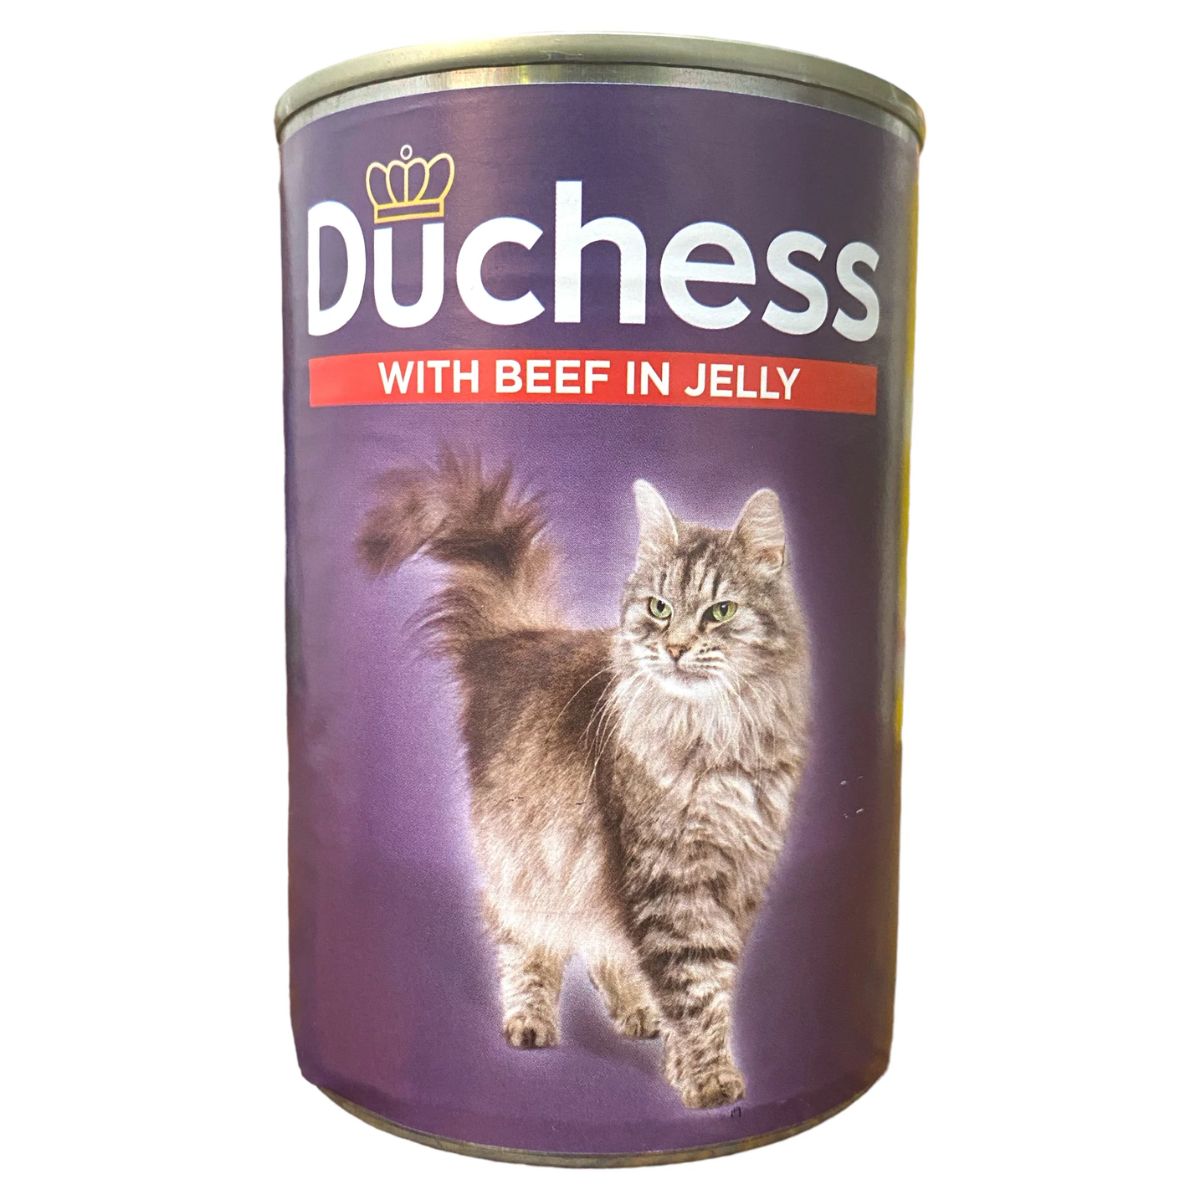 A can of Duchess - Beef Jelly - 400g.